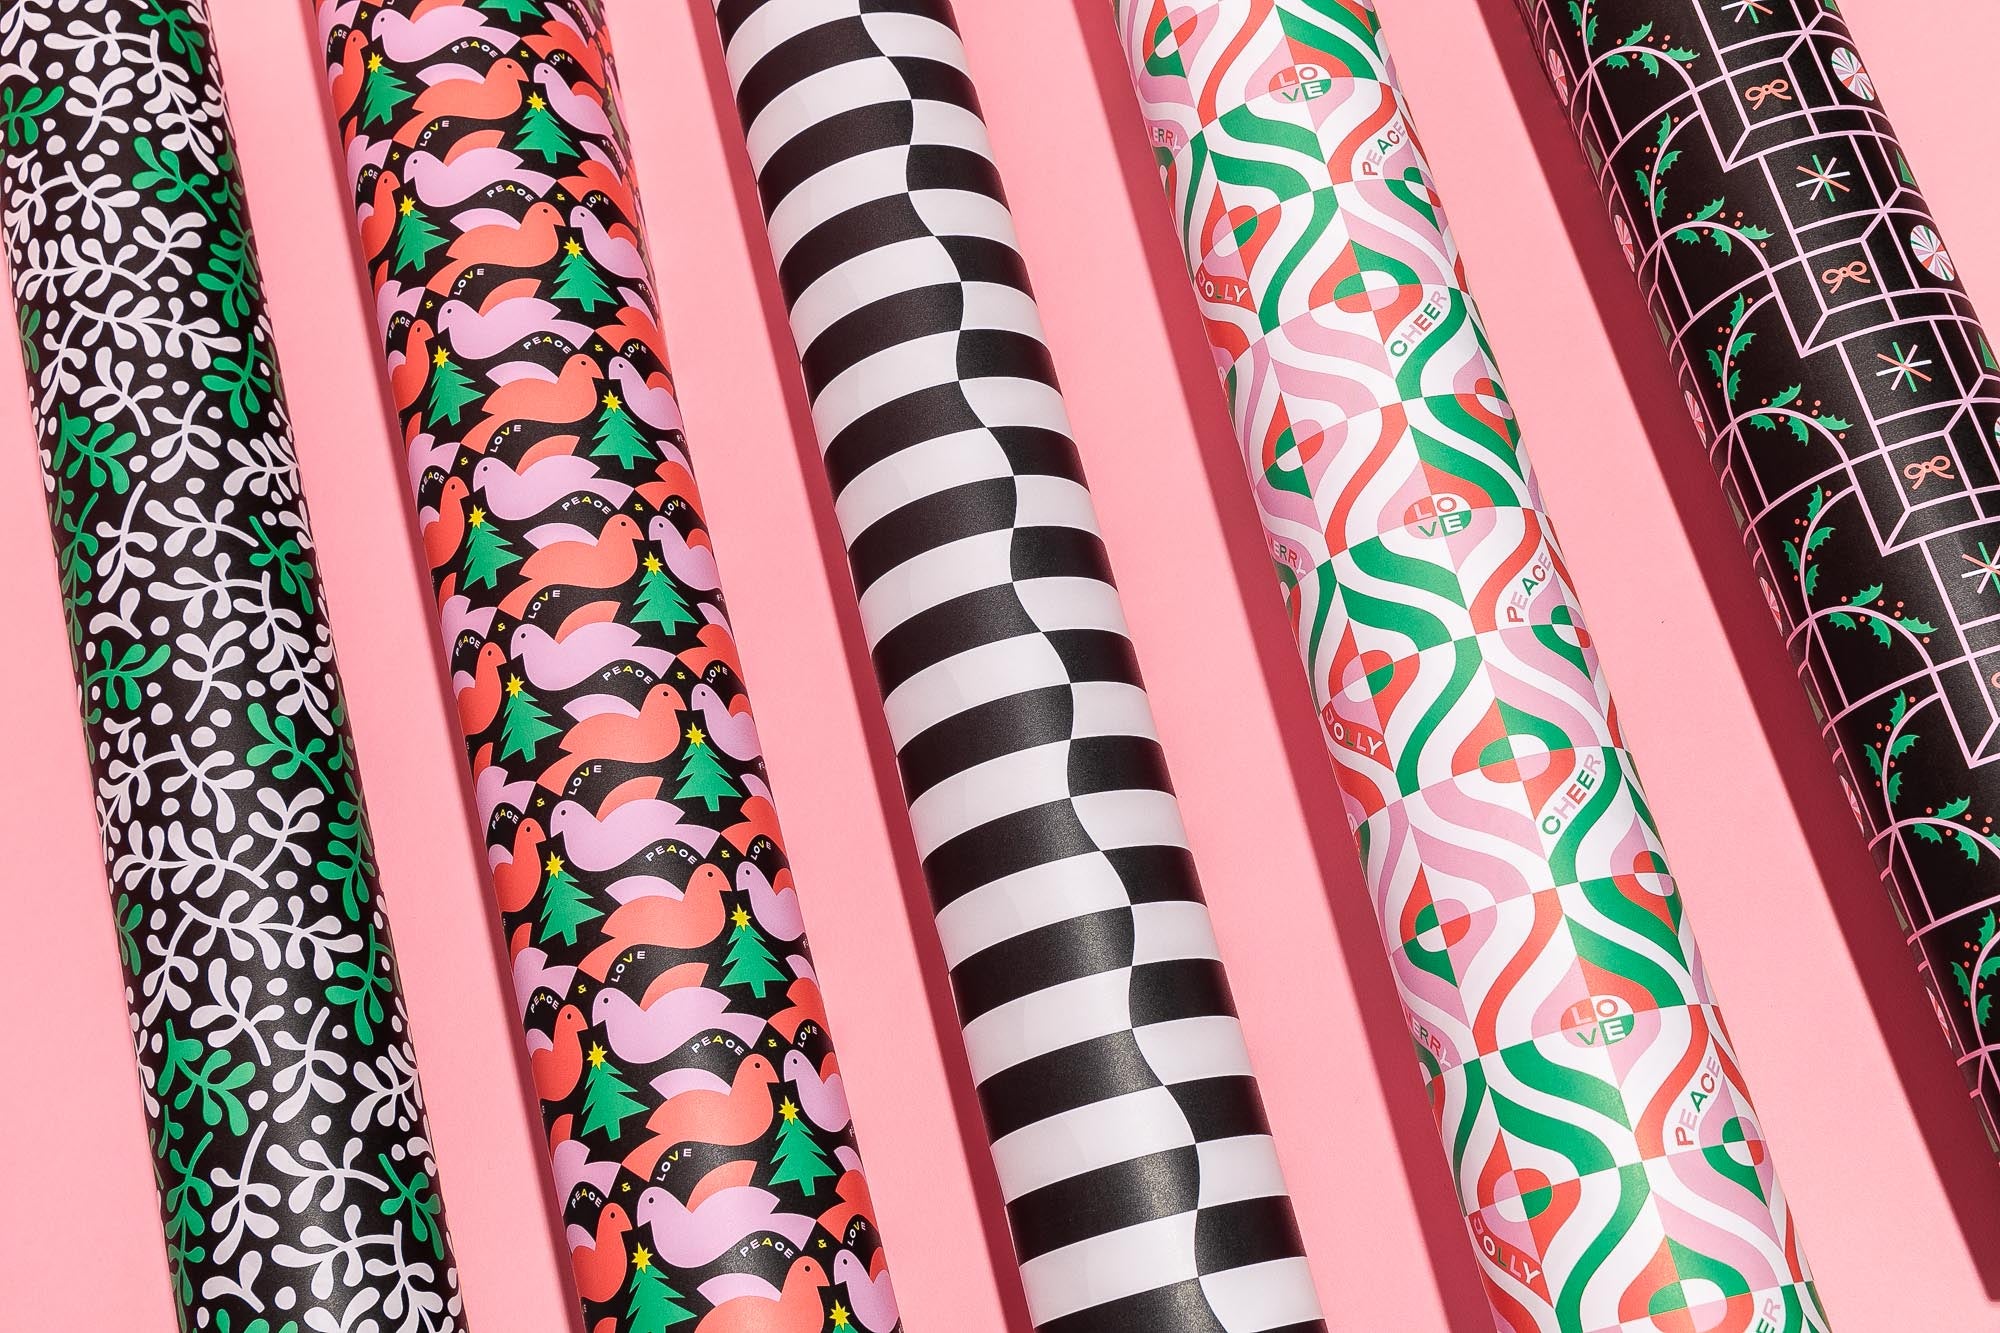 Rolls of cute mid-century inspired Christmas wrapping paper in abstract festive prints and patterns by @mydarlin_bk